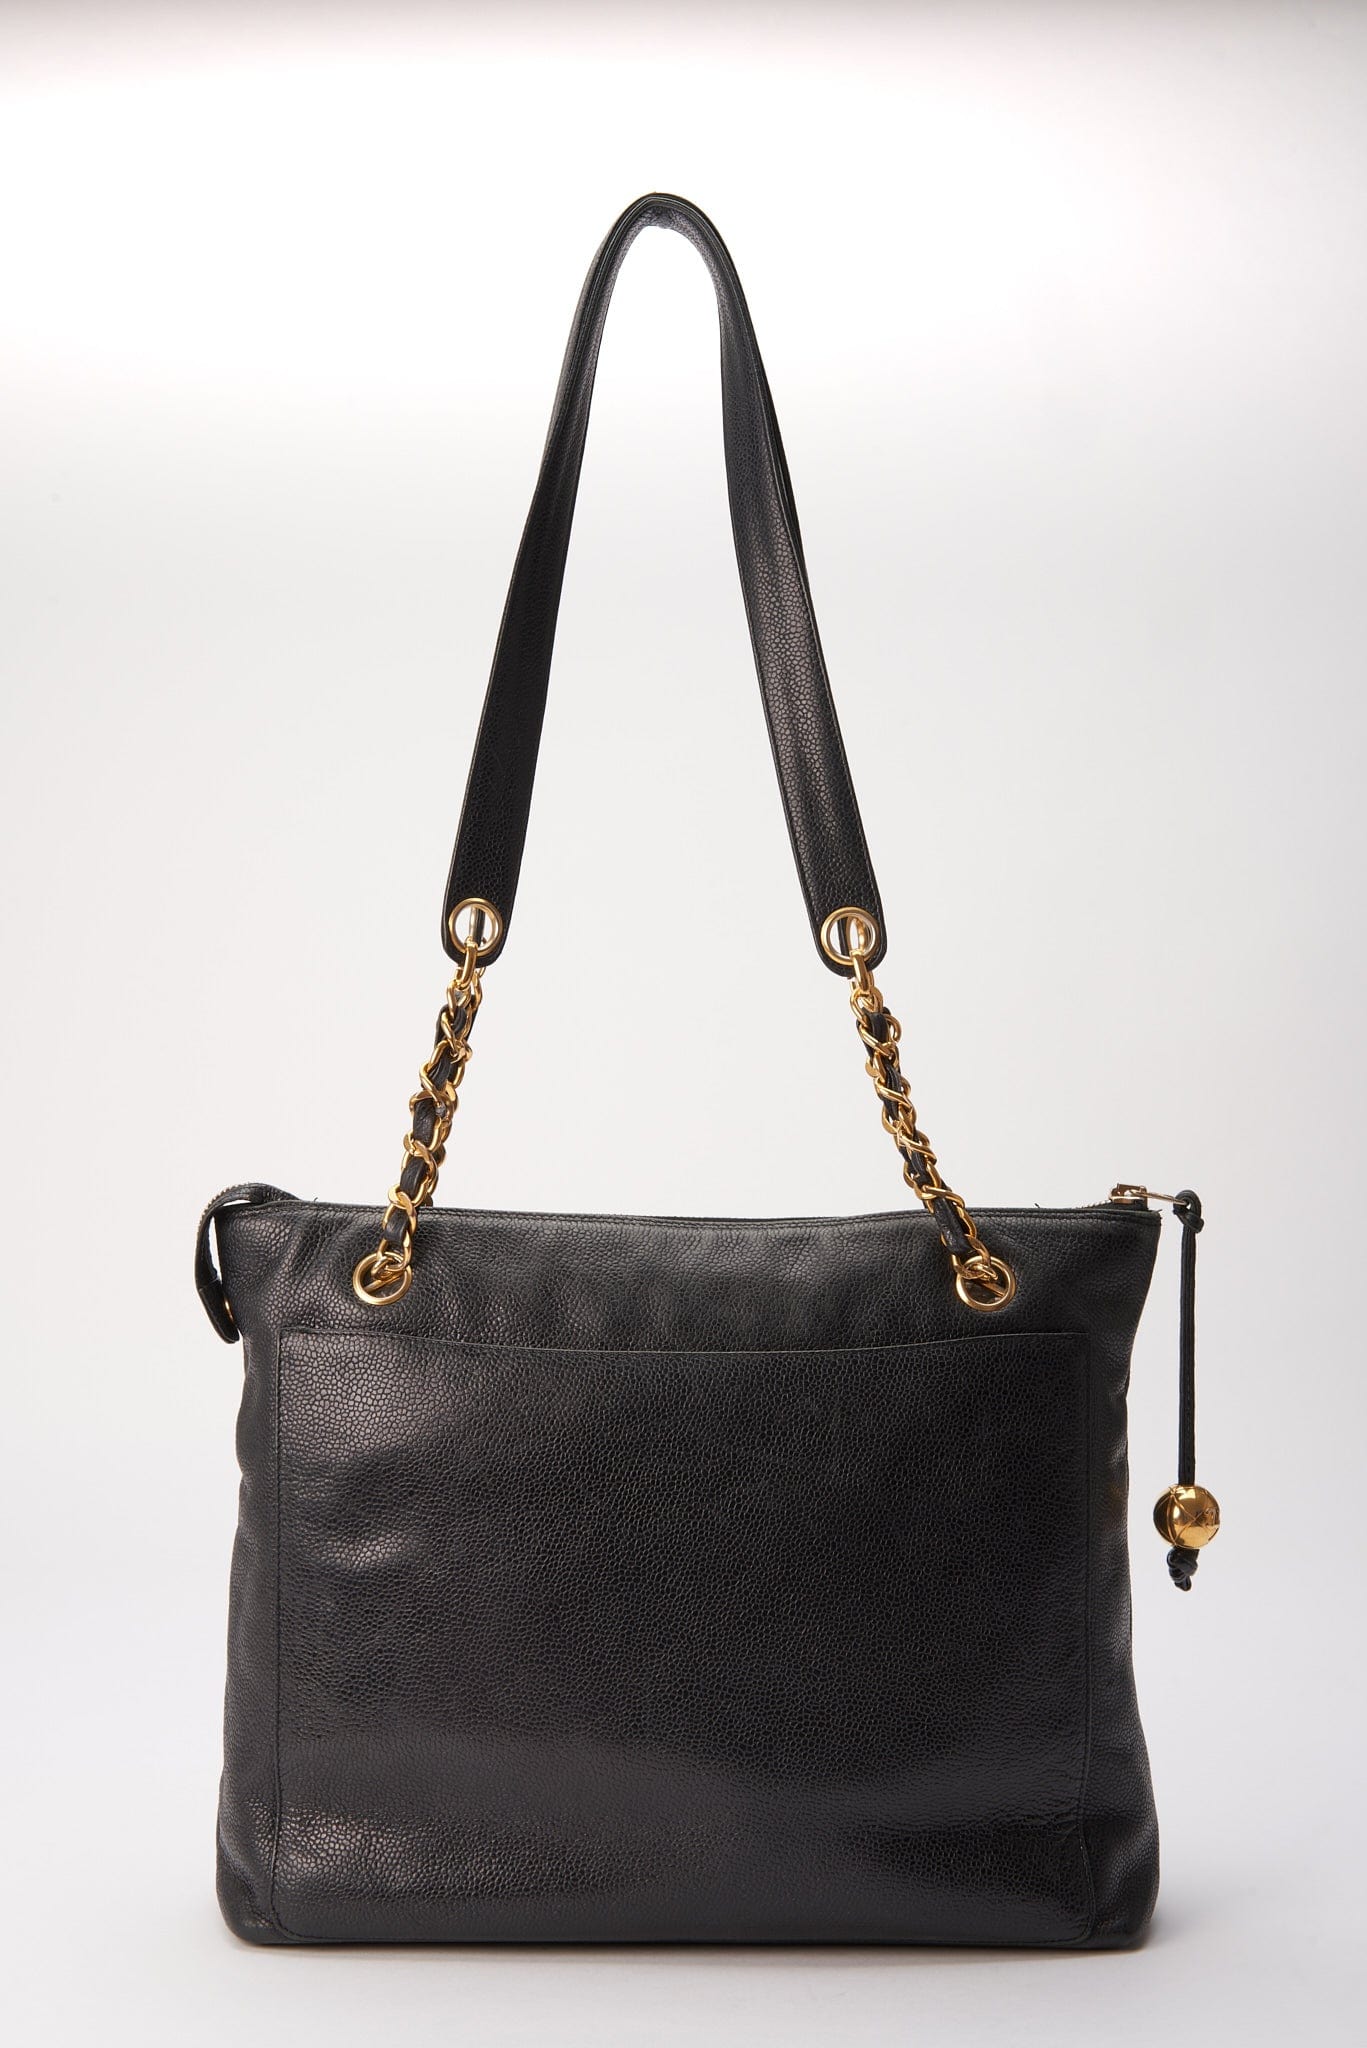 Vintage Chanel Black Leather Tote Bag with 24K Gold Plated